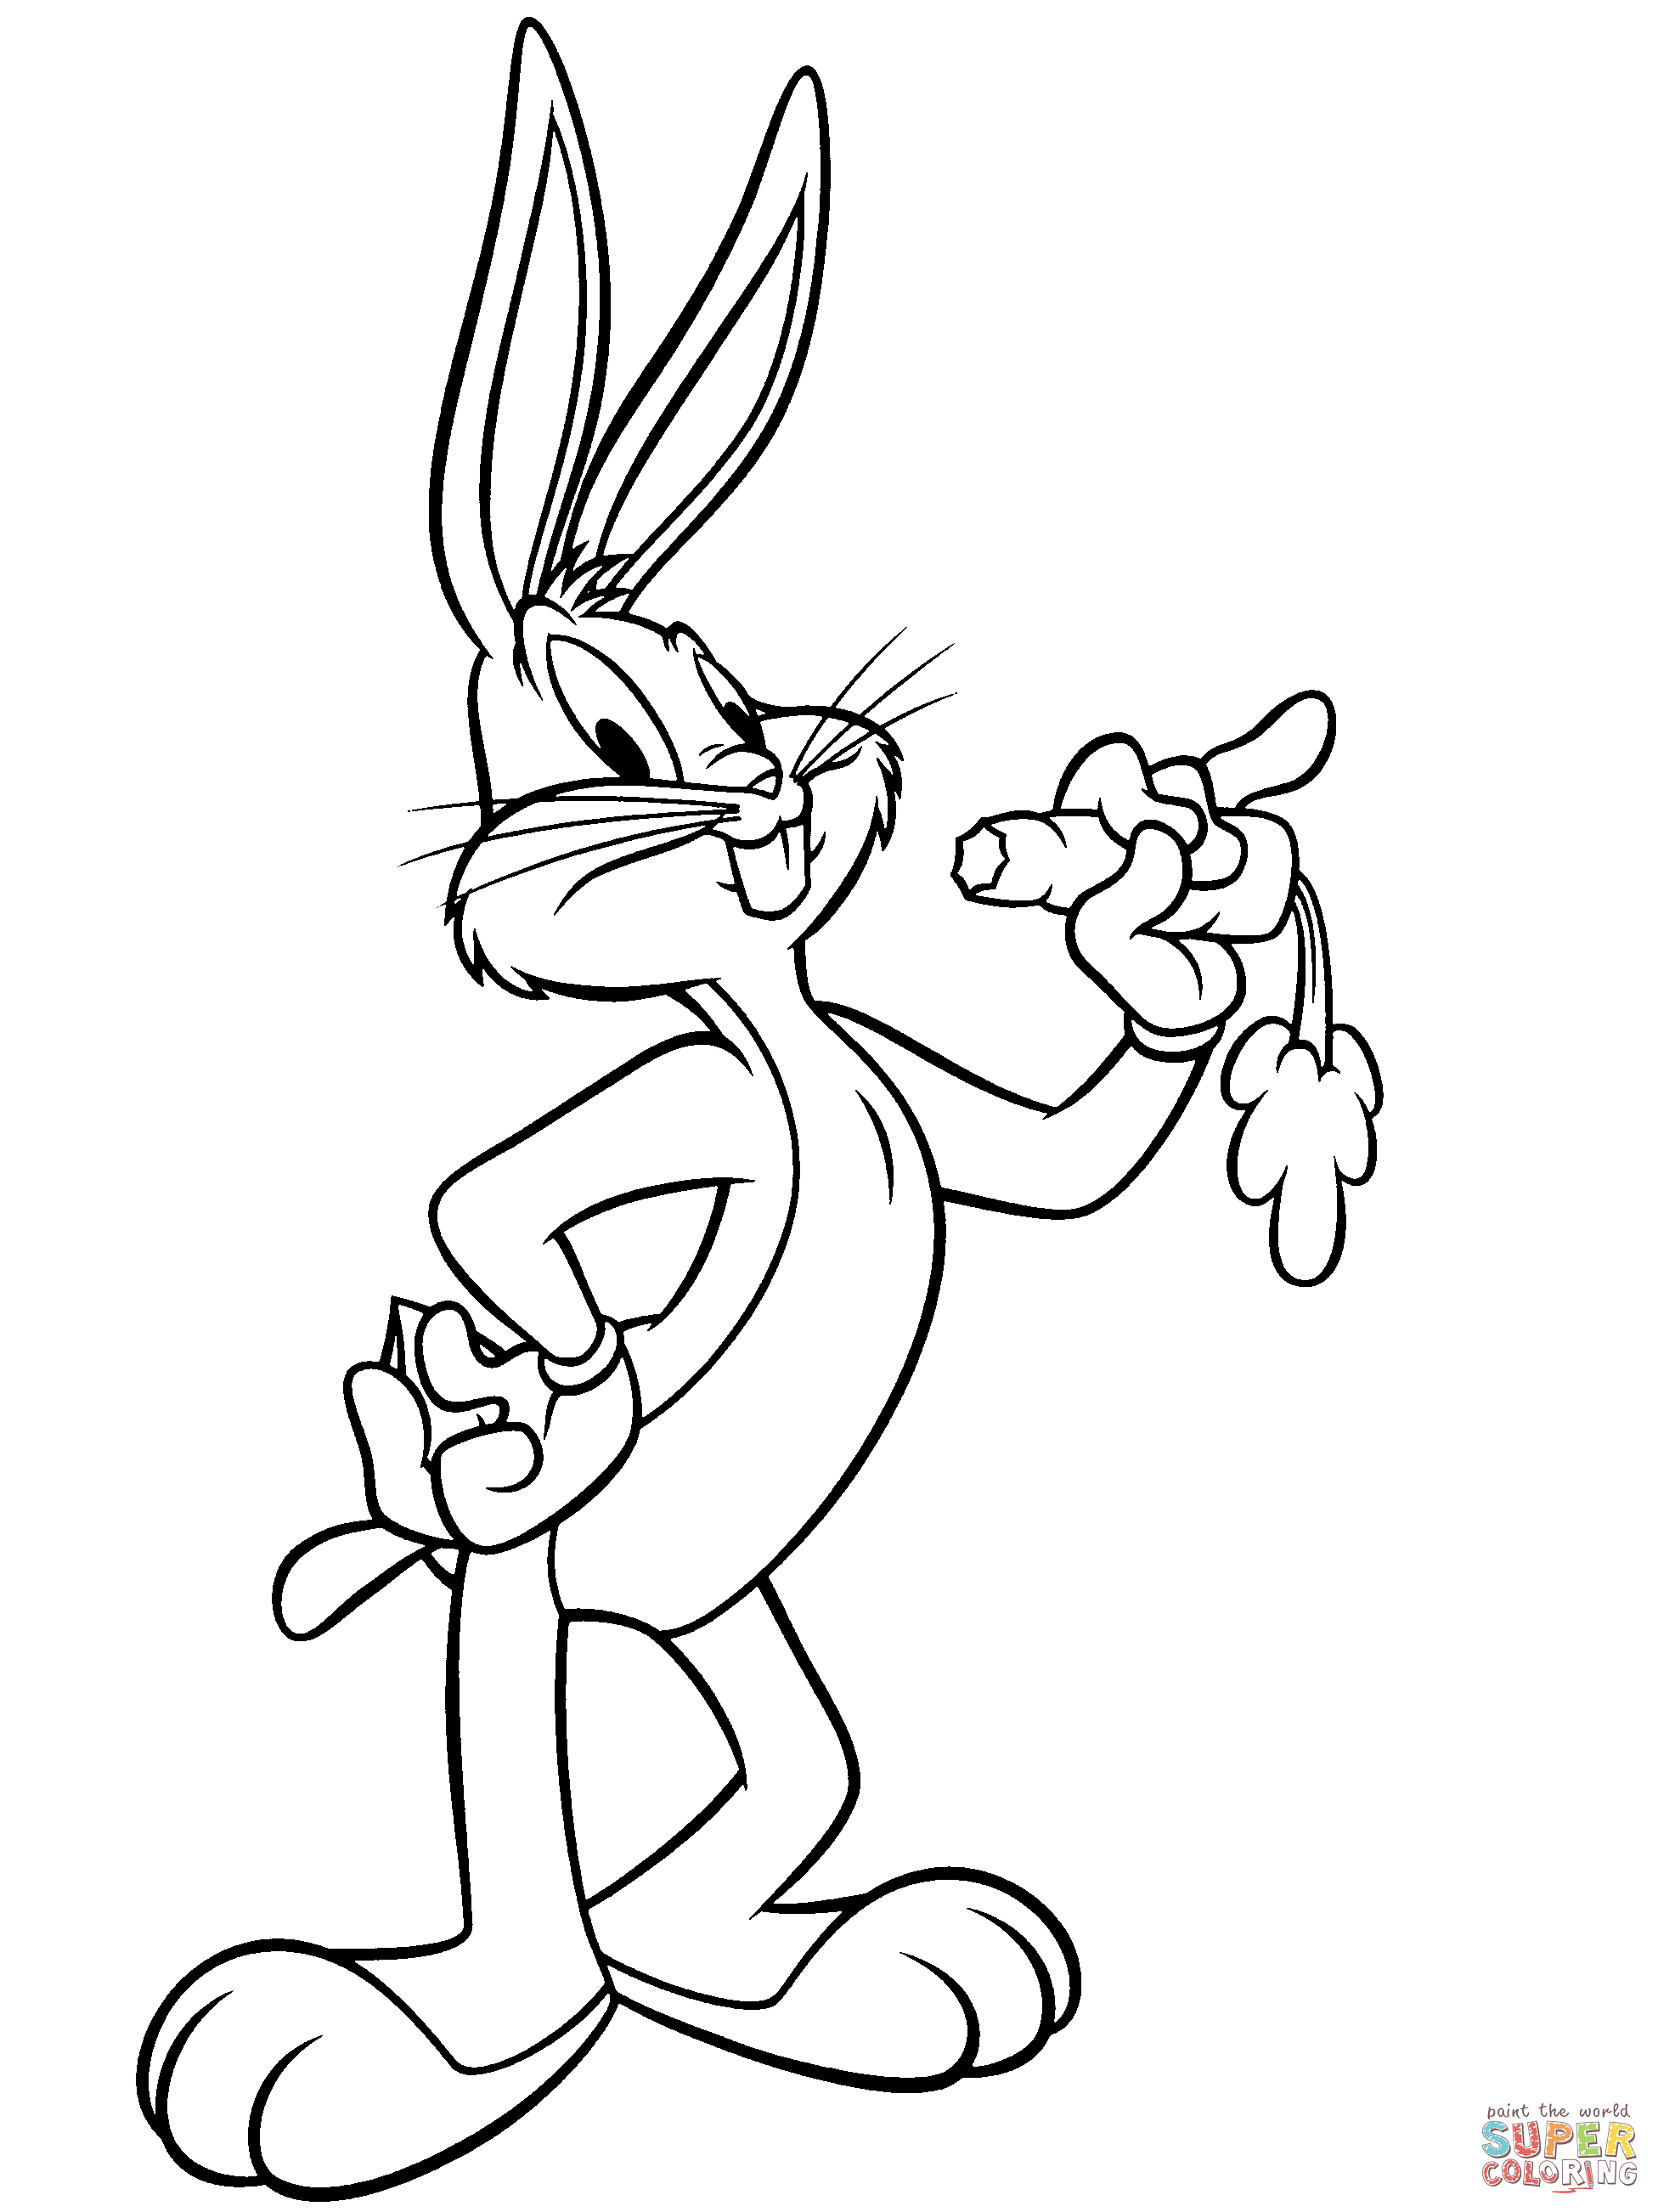 Bugs Bunny Coloring Pages | Free Coloring Pages - Free Printable Bugs Bunny Coloring Pages